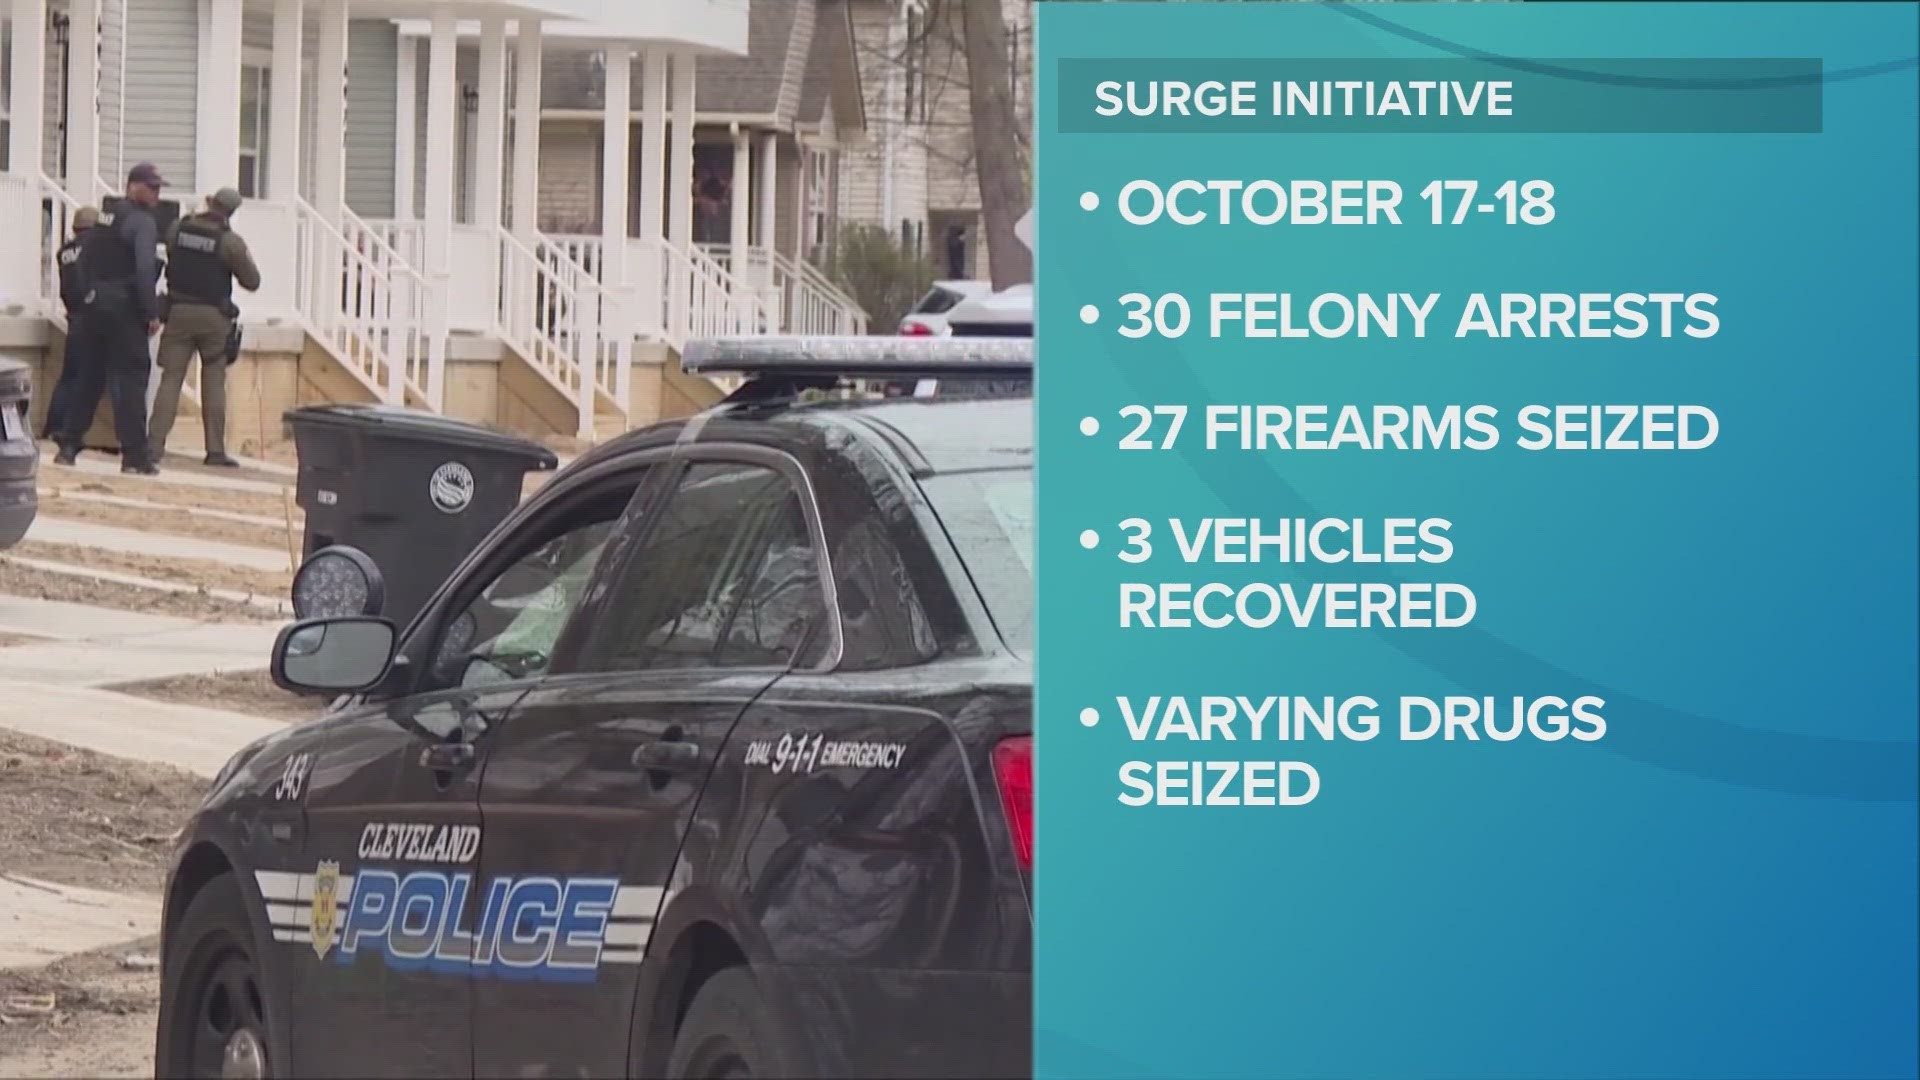 The operation, conducted on Oct. 17-18, was the state's 6th 'surge initiative' to fight violent crime in Cleveland since August.